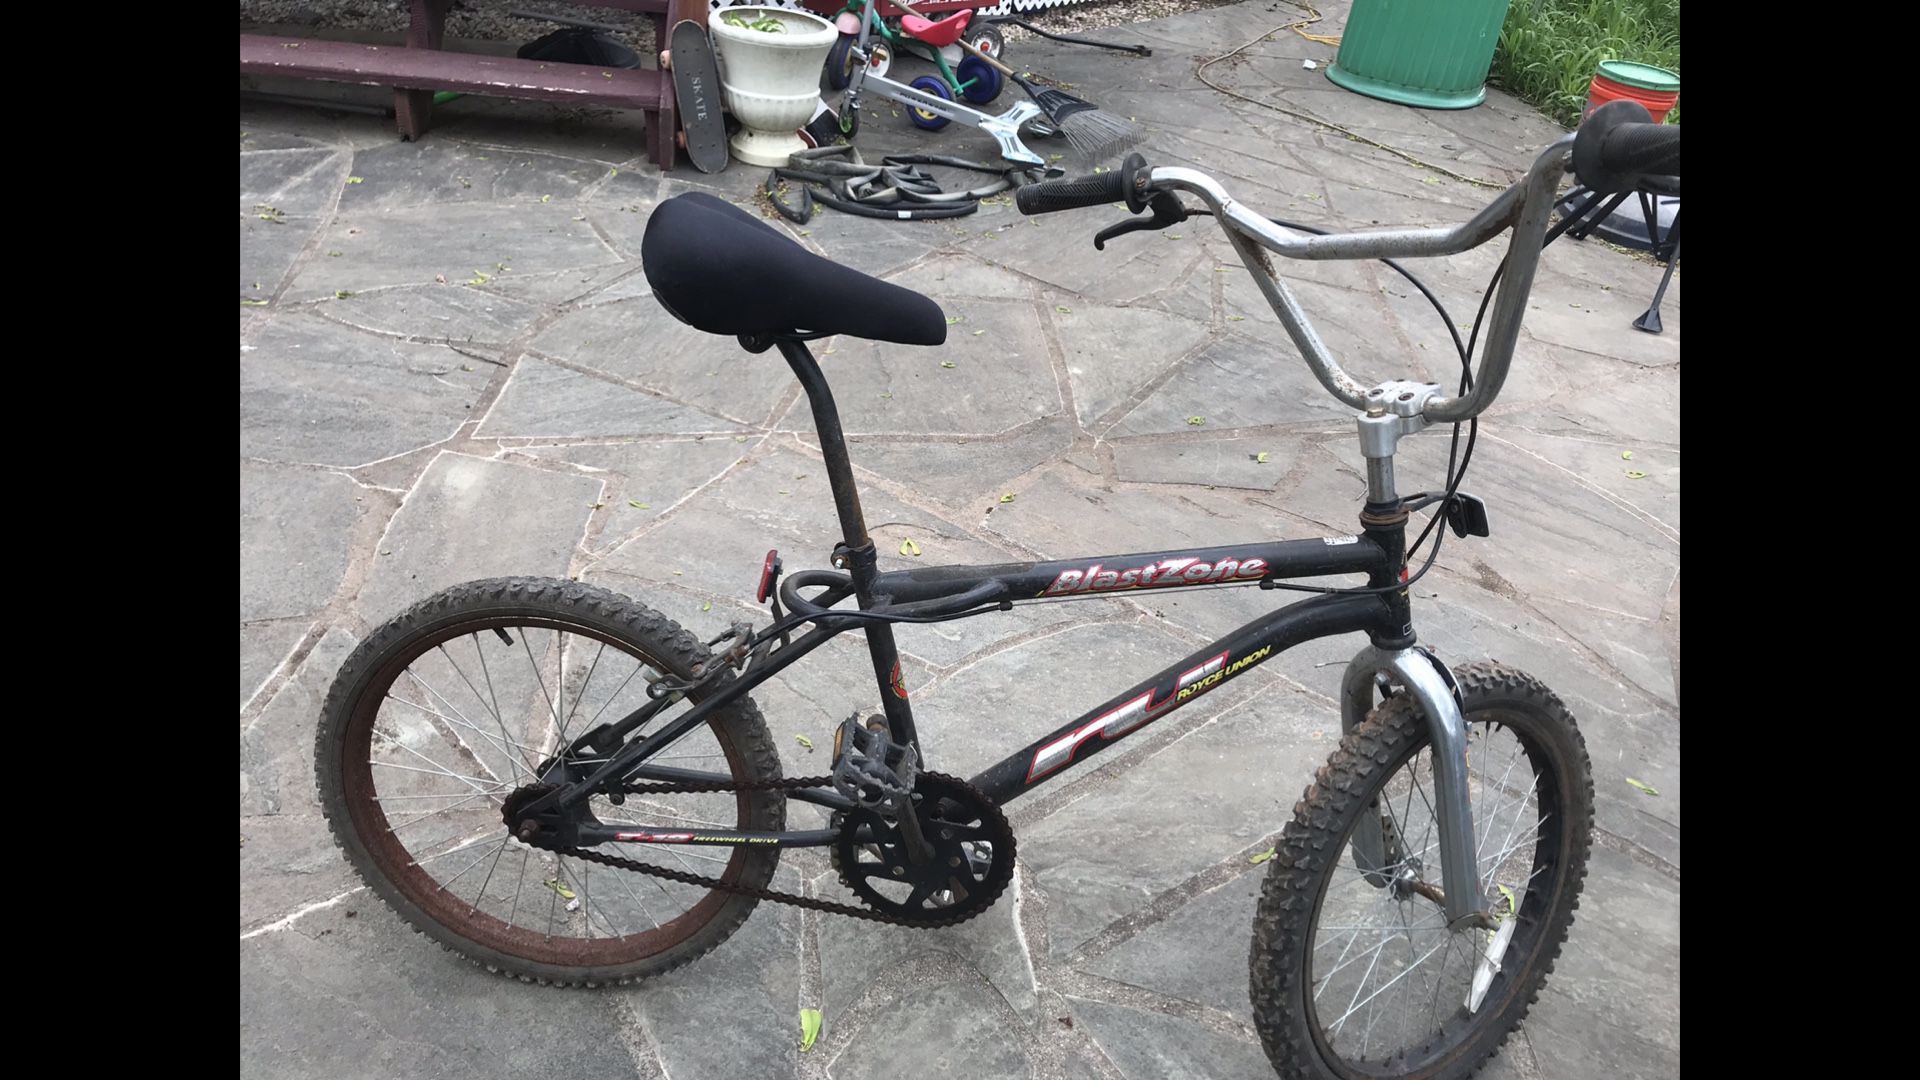 BMX bicycle, as you can see she ready and waiting